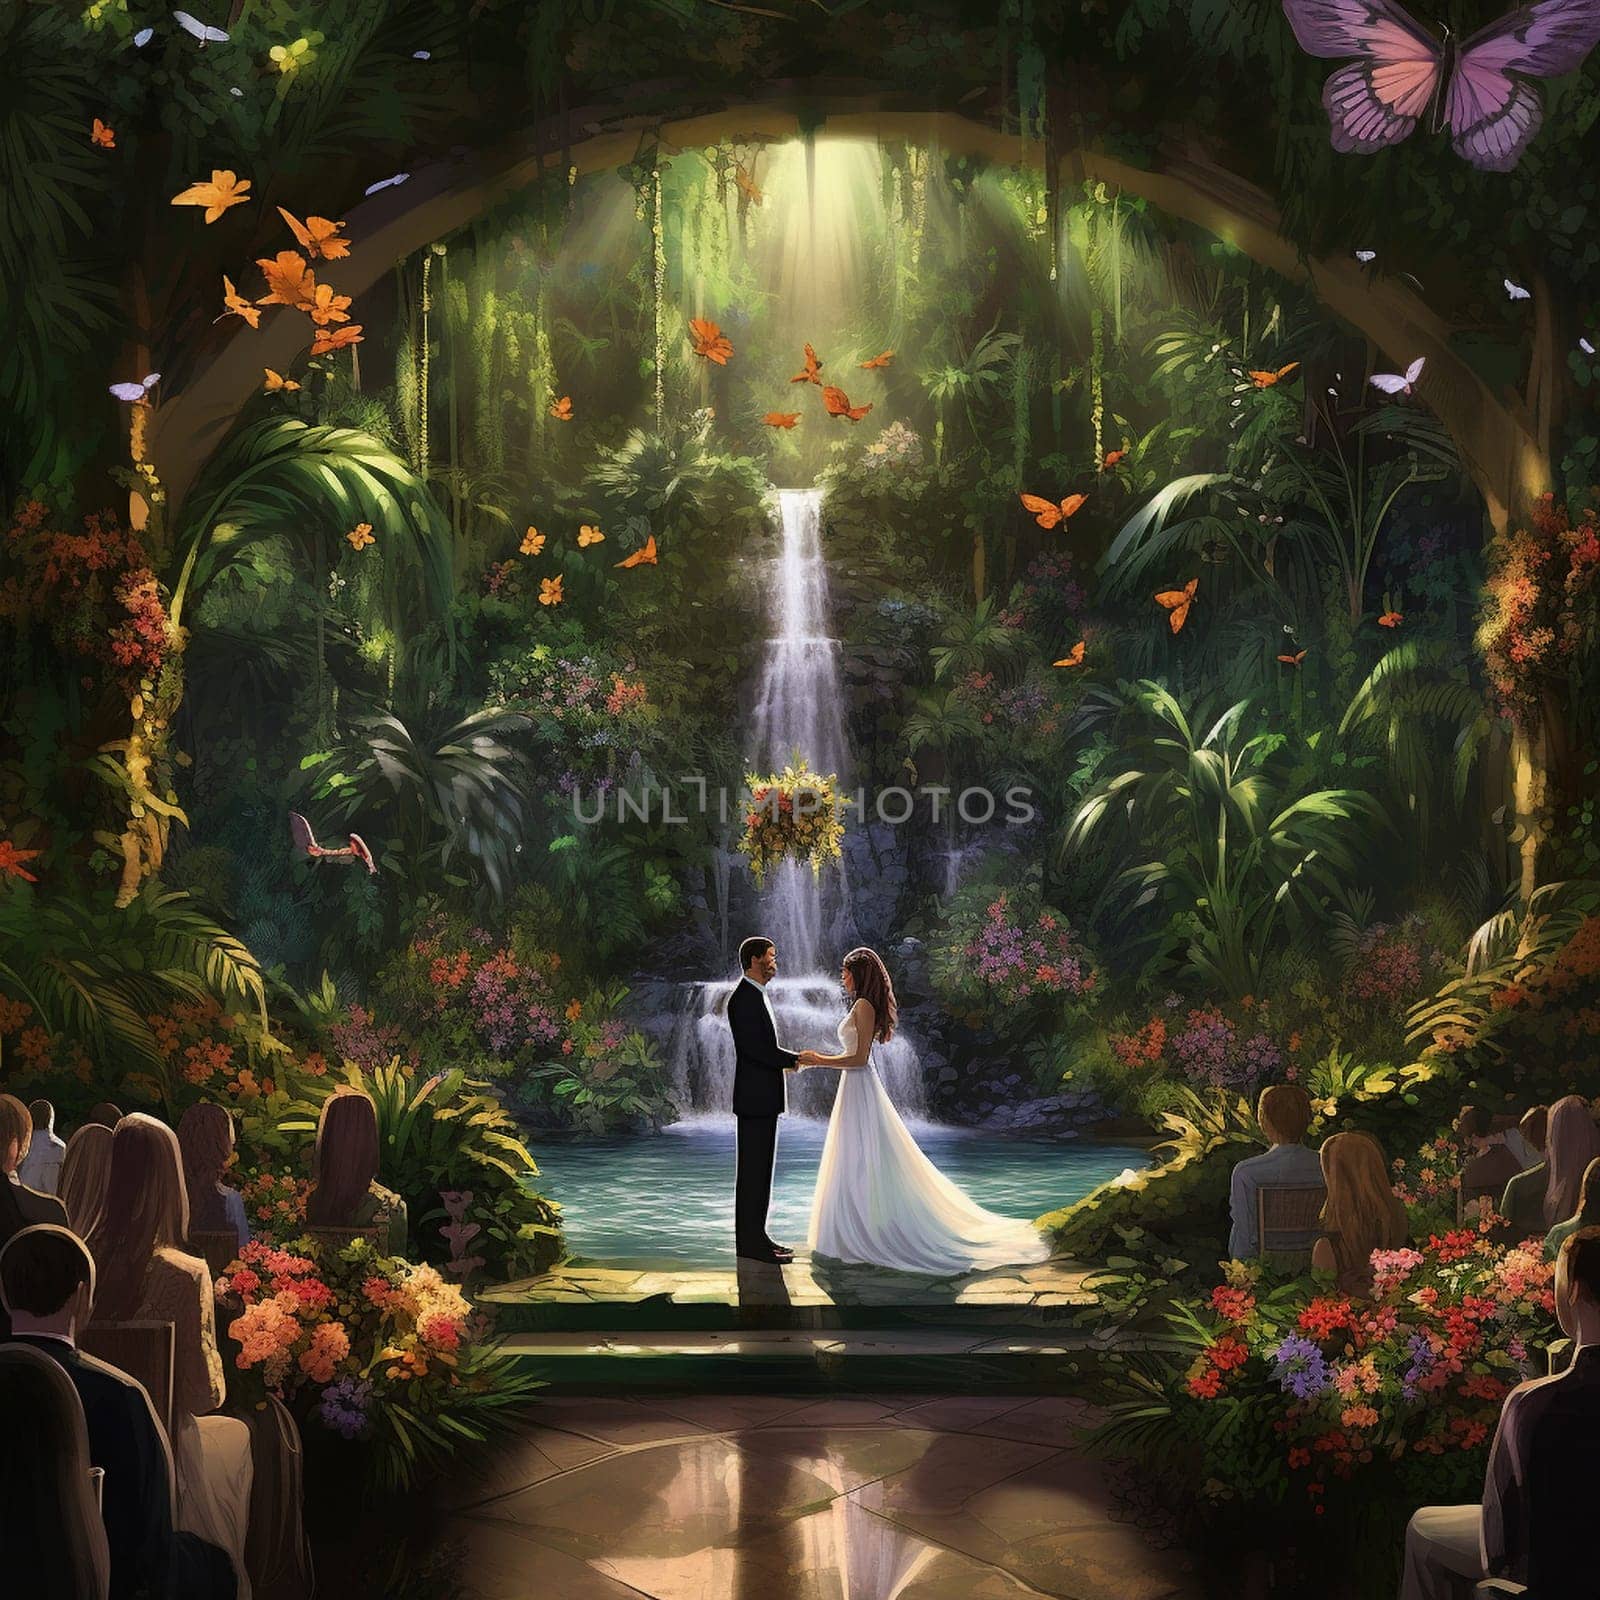 Immerse yourself in the enchanting scene of Emerald Oasis: Vows Exchanged in a Verdant Sanctuary. This impressionistic masterpiece captures the serenity and romance of a lush and vibrant sanctuary. The lush green foliage creates a verdant backdrop, while the cascading waterfall becomes the focal point of the image. Amidst the idyllic scenery, two individuals are seen exchanging wedding vows, their love celebrated in nature's embrace. Blooming flowers and shimmering butterflies add an ethereal touch to the atmosphere, evoking a sense of tranquility and enchantment. Let this captivating image transport you to a world of natural beauty and everlasting love.